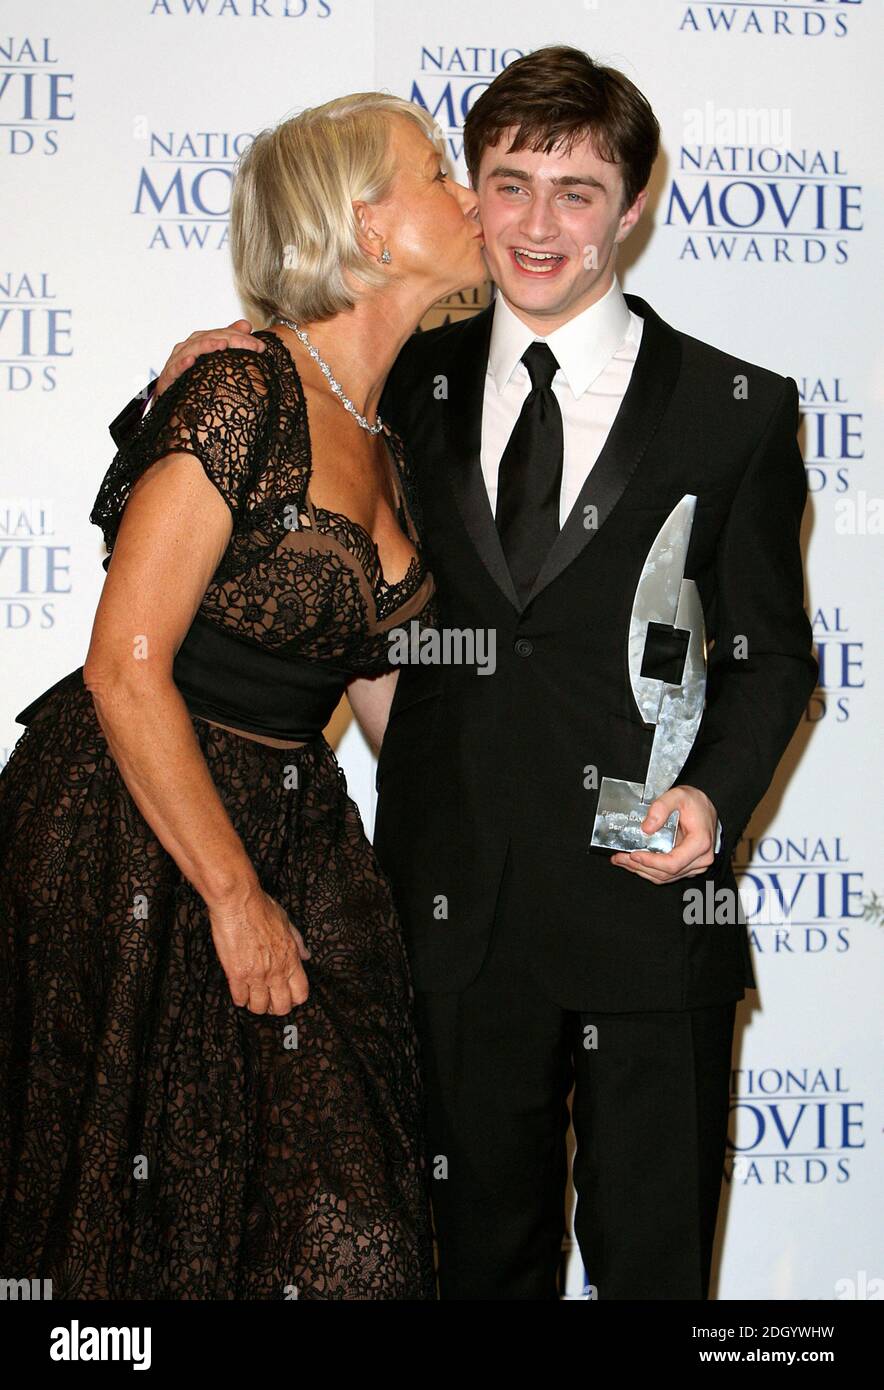 Daniel Radcliffe receives his award for Best Actor (for Harry Potter) from Dame Helen Mirren during The National Movie Awards at the Royal Festival Hall, central London. Stock Photo